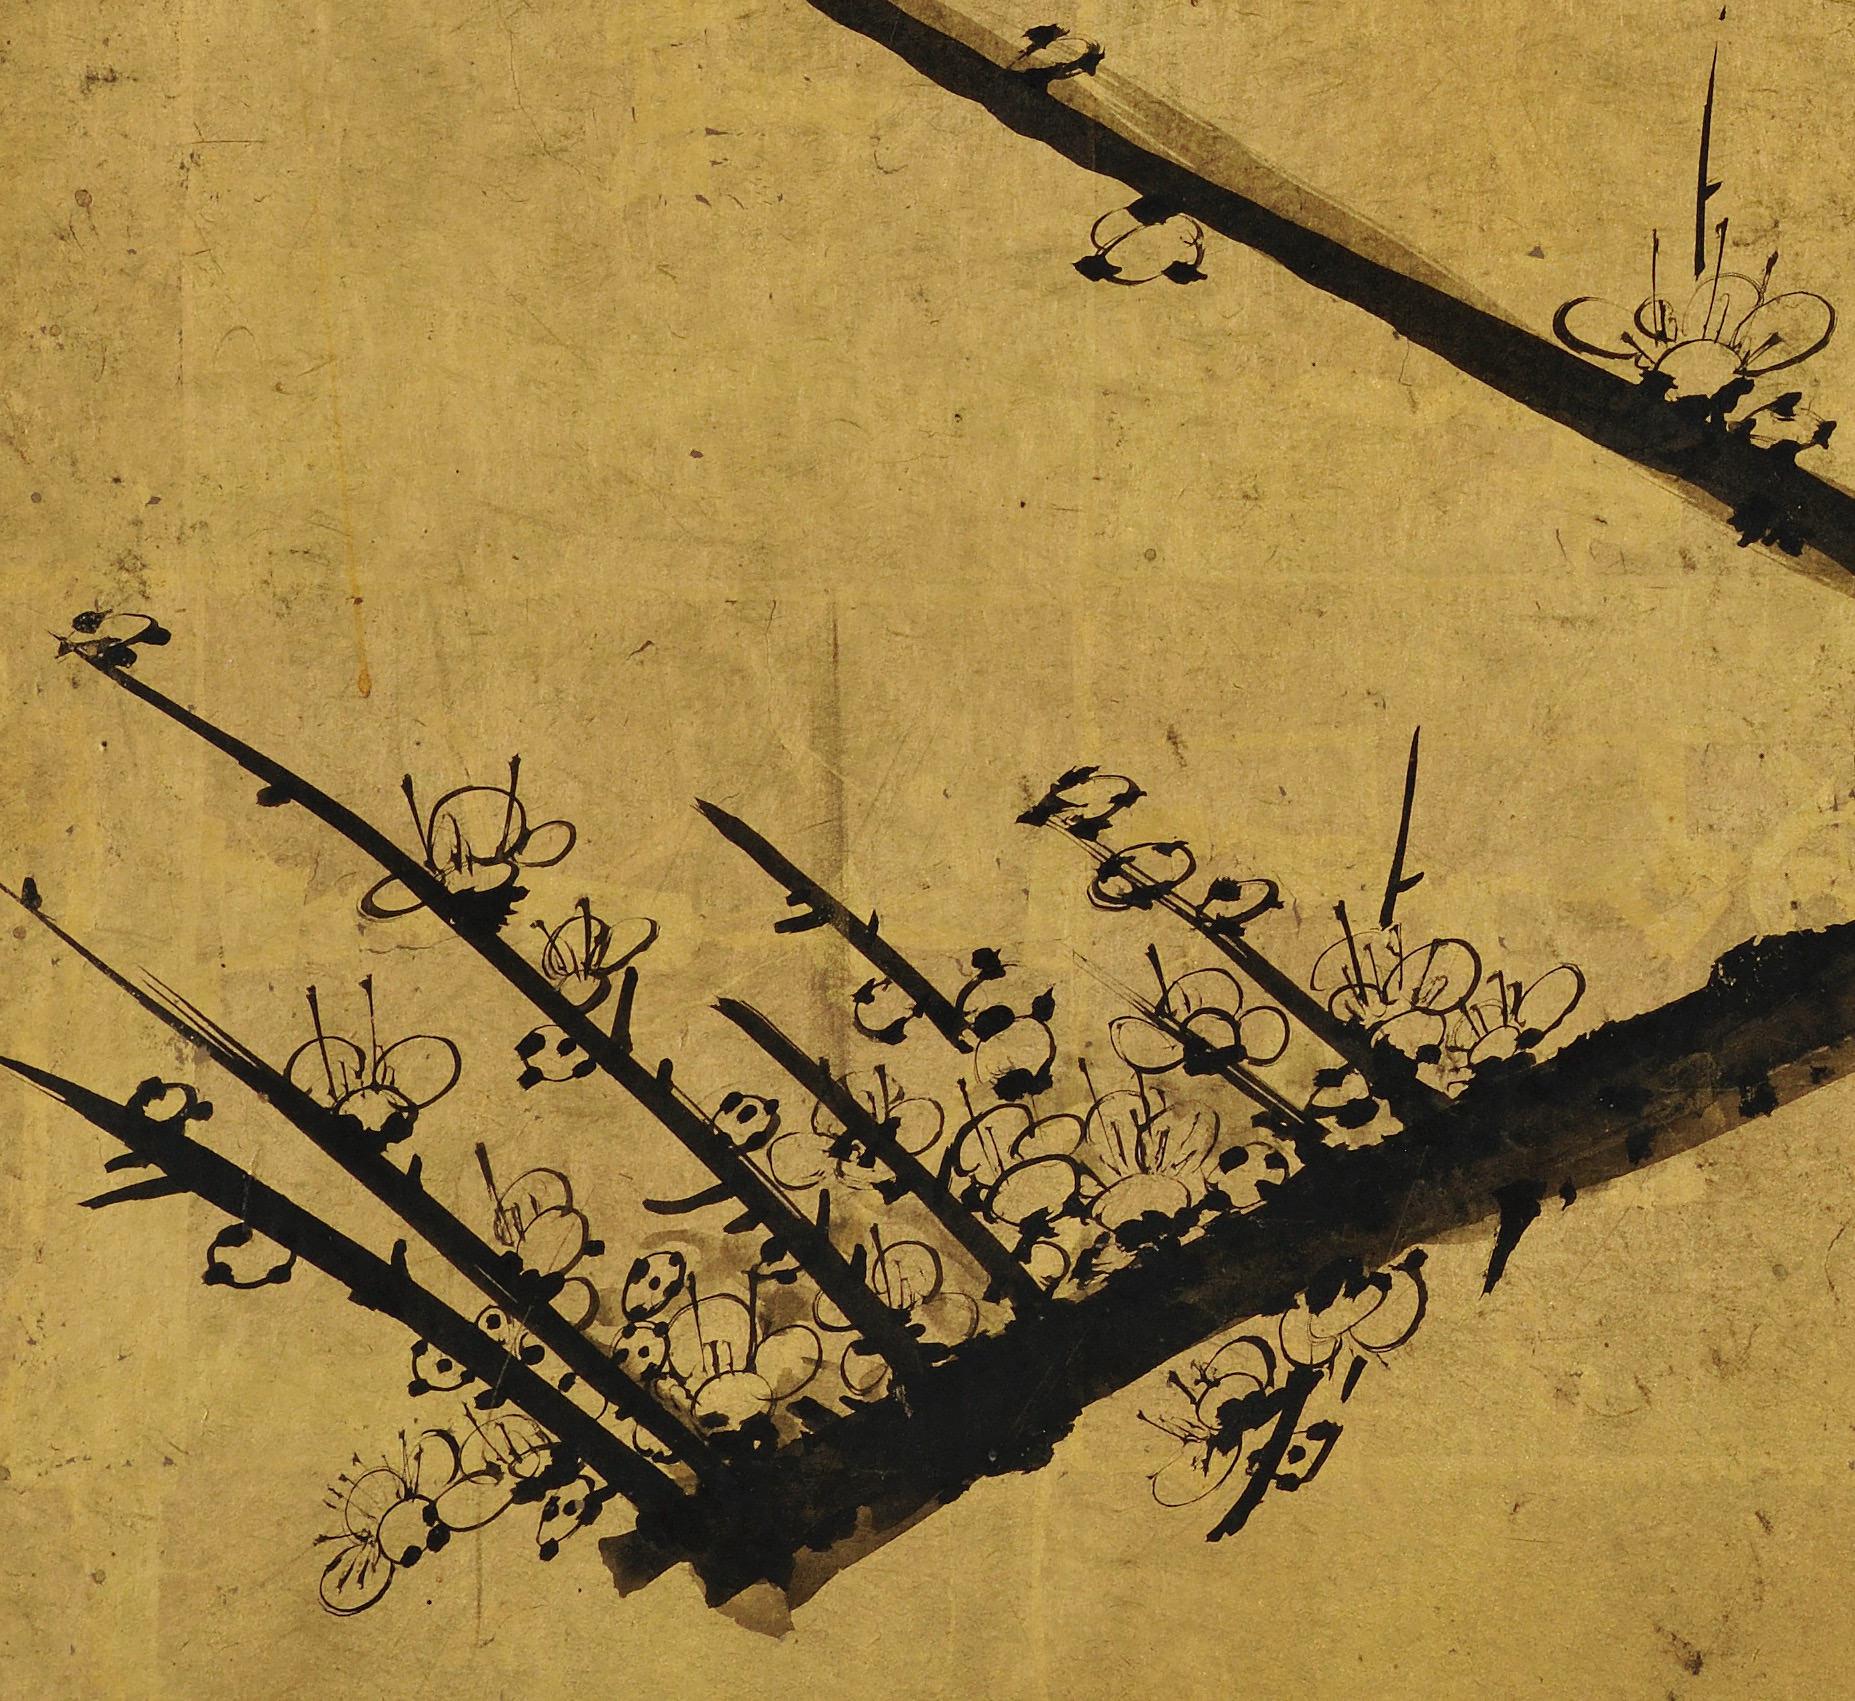 Gold Leaf 17th Century Japanese Screen, Ink Plum Blossoms by Priest Hozobo Kojo